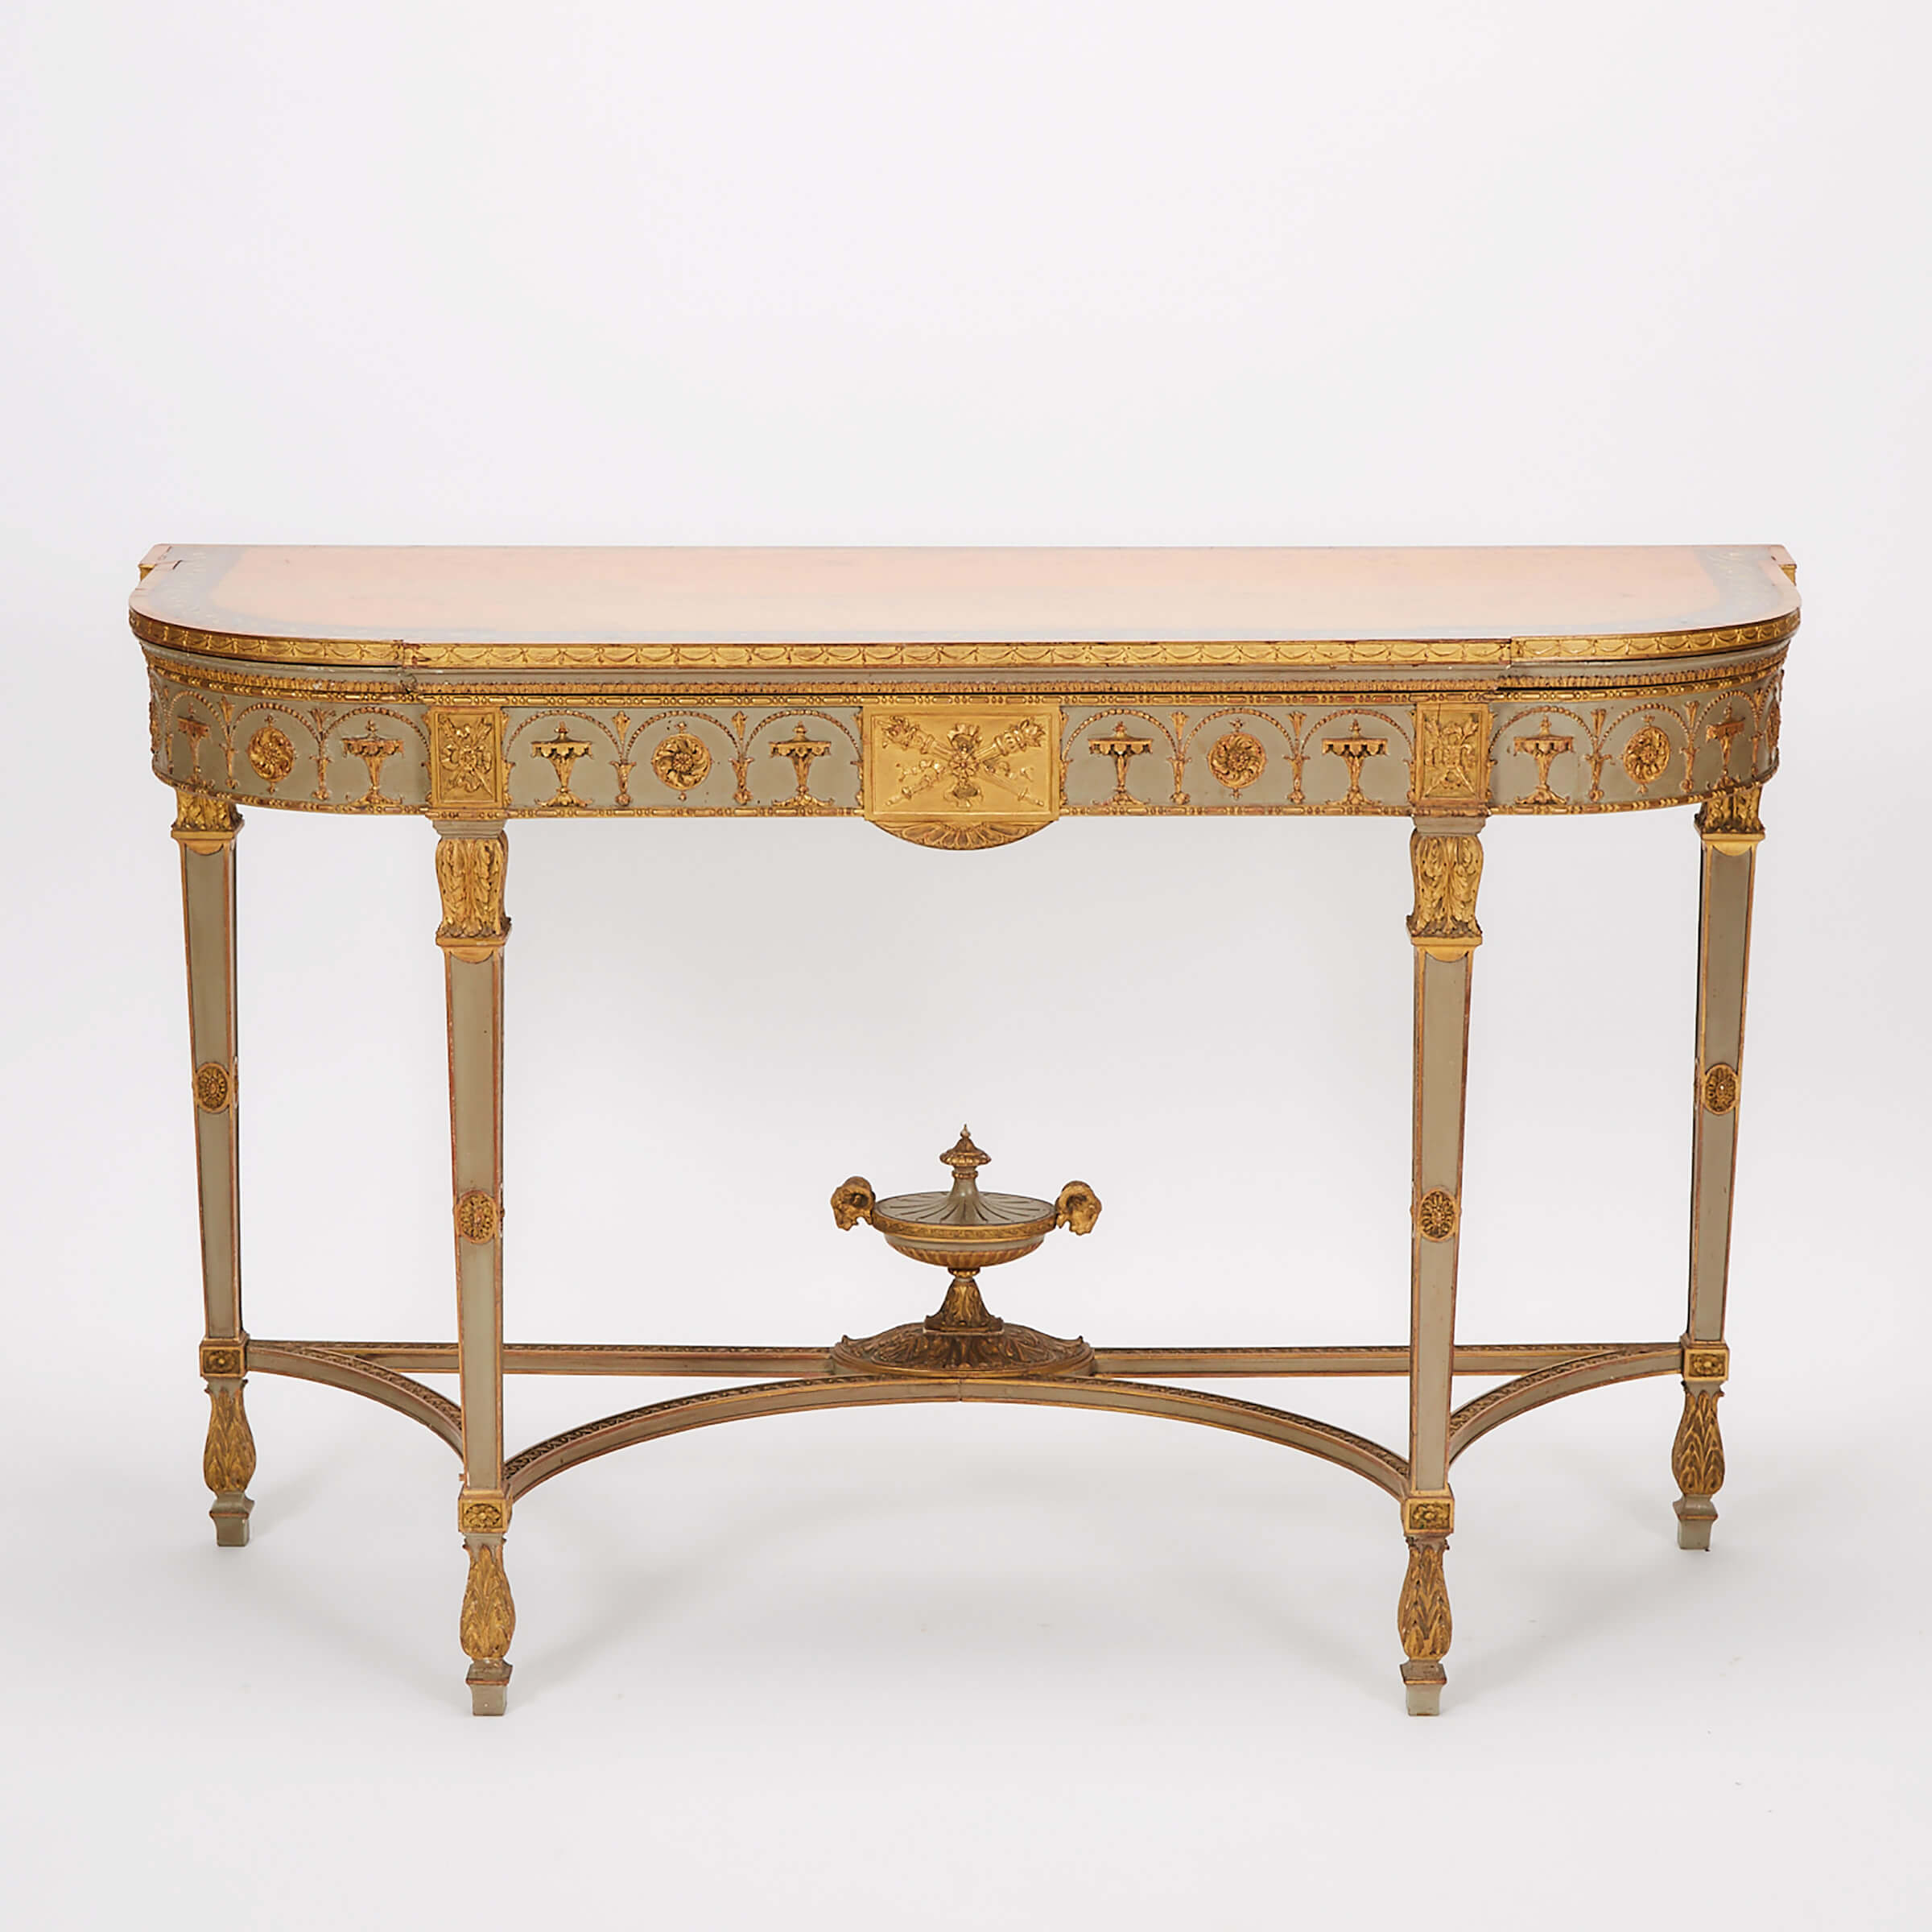 Neoclassical Italian Painted and Parcel Gilt Console Table, early 20th century